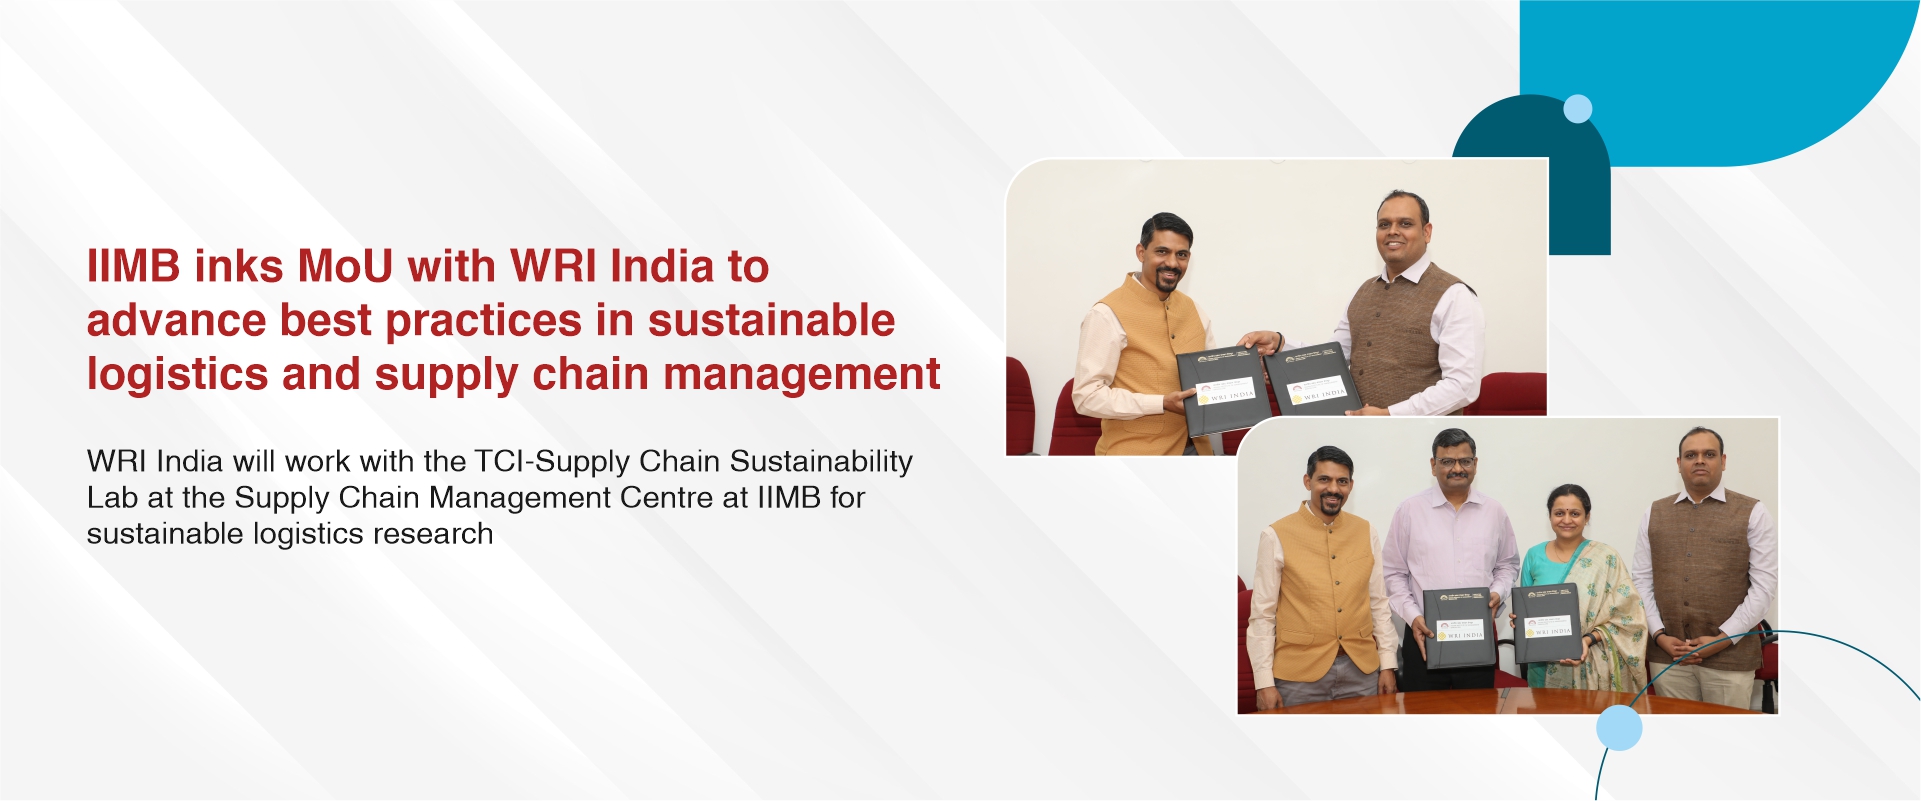 Supply Chain Management Centre hosts conference on ‘Maintaining safety and quality in perishable food supply chain using technology’ on July 20